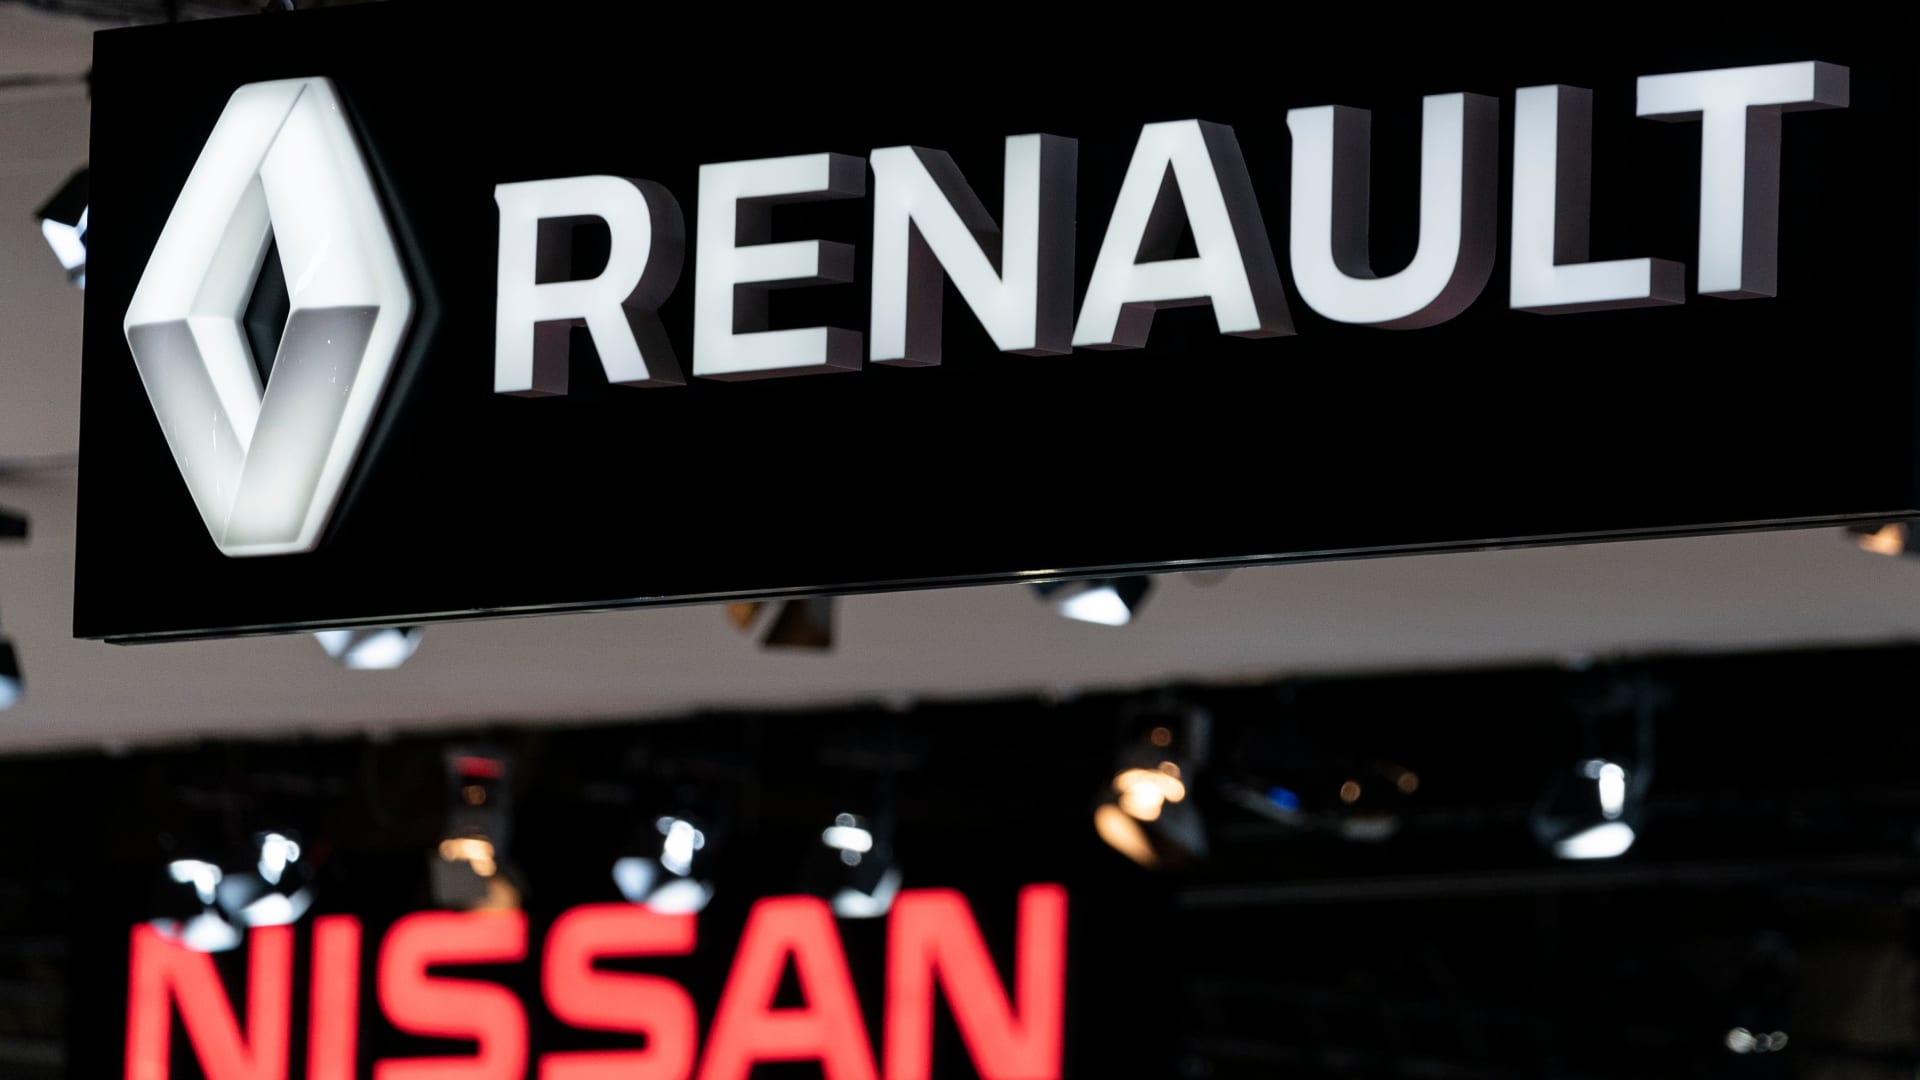 Renault slashes Nissan stake as the automakers overhaul their decades-long alliance Auto Recent